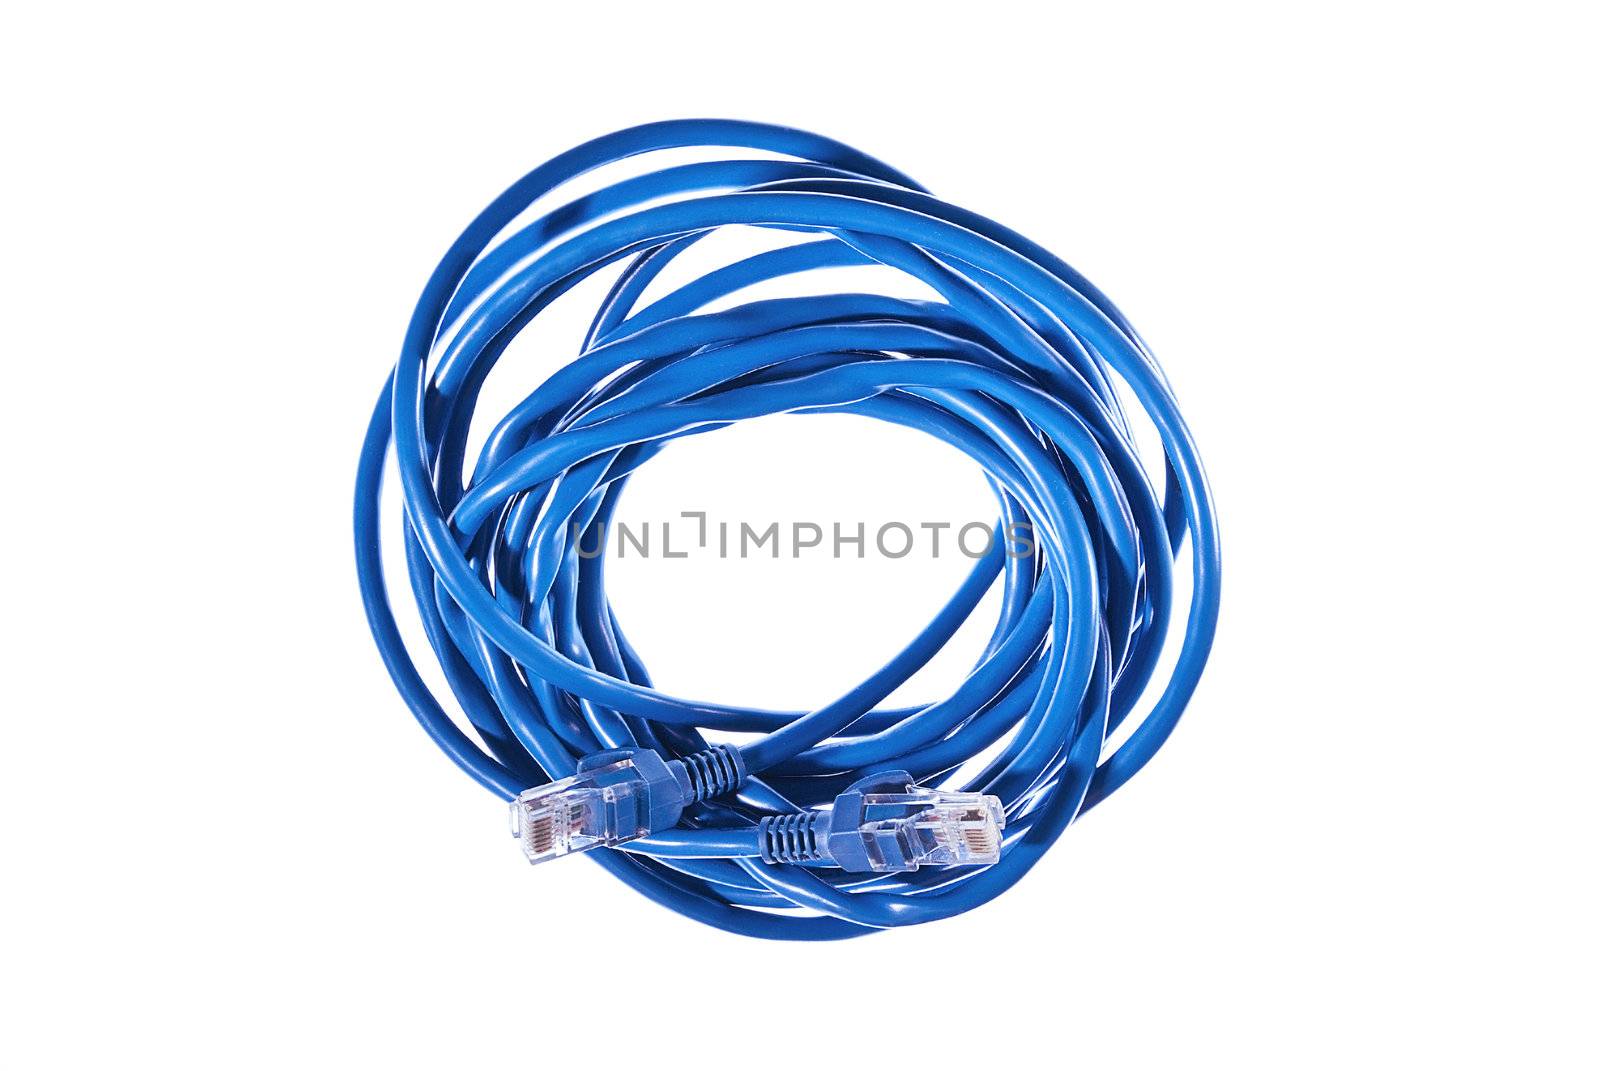 Closeup of blue internet cable on the white background.